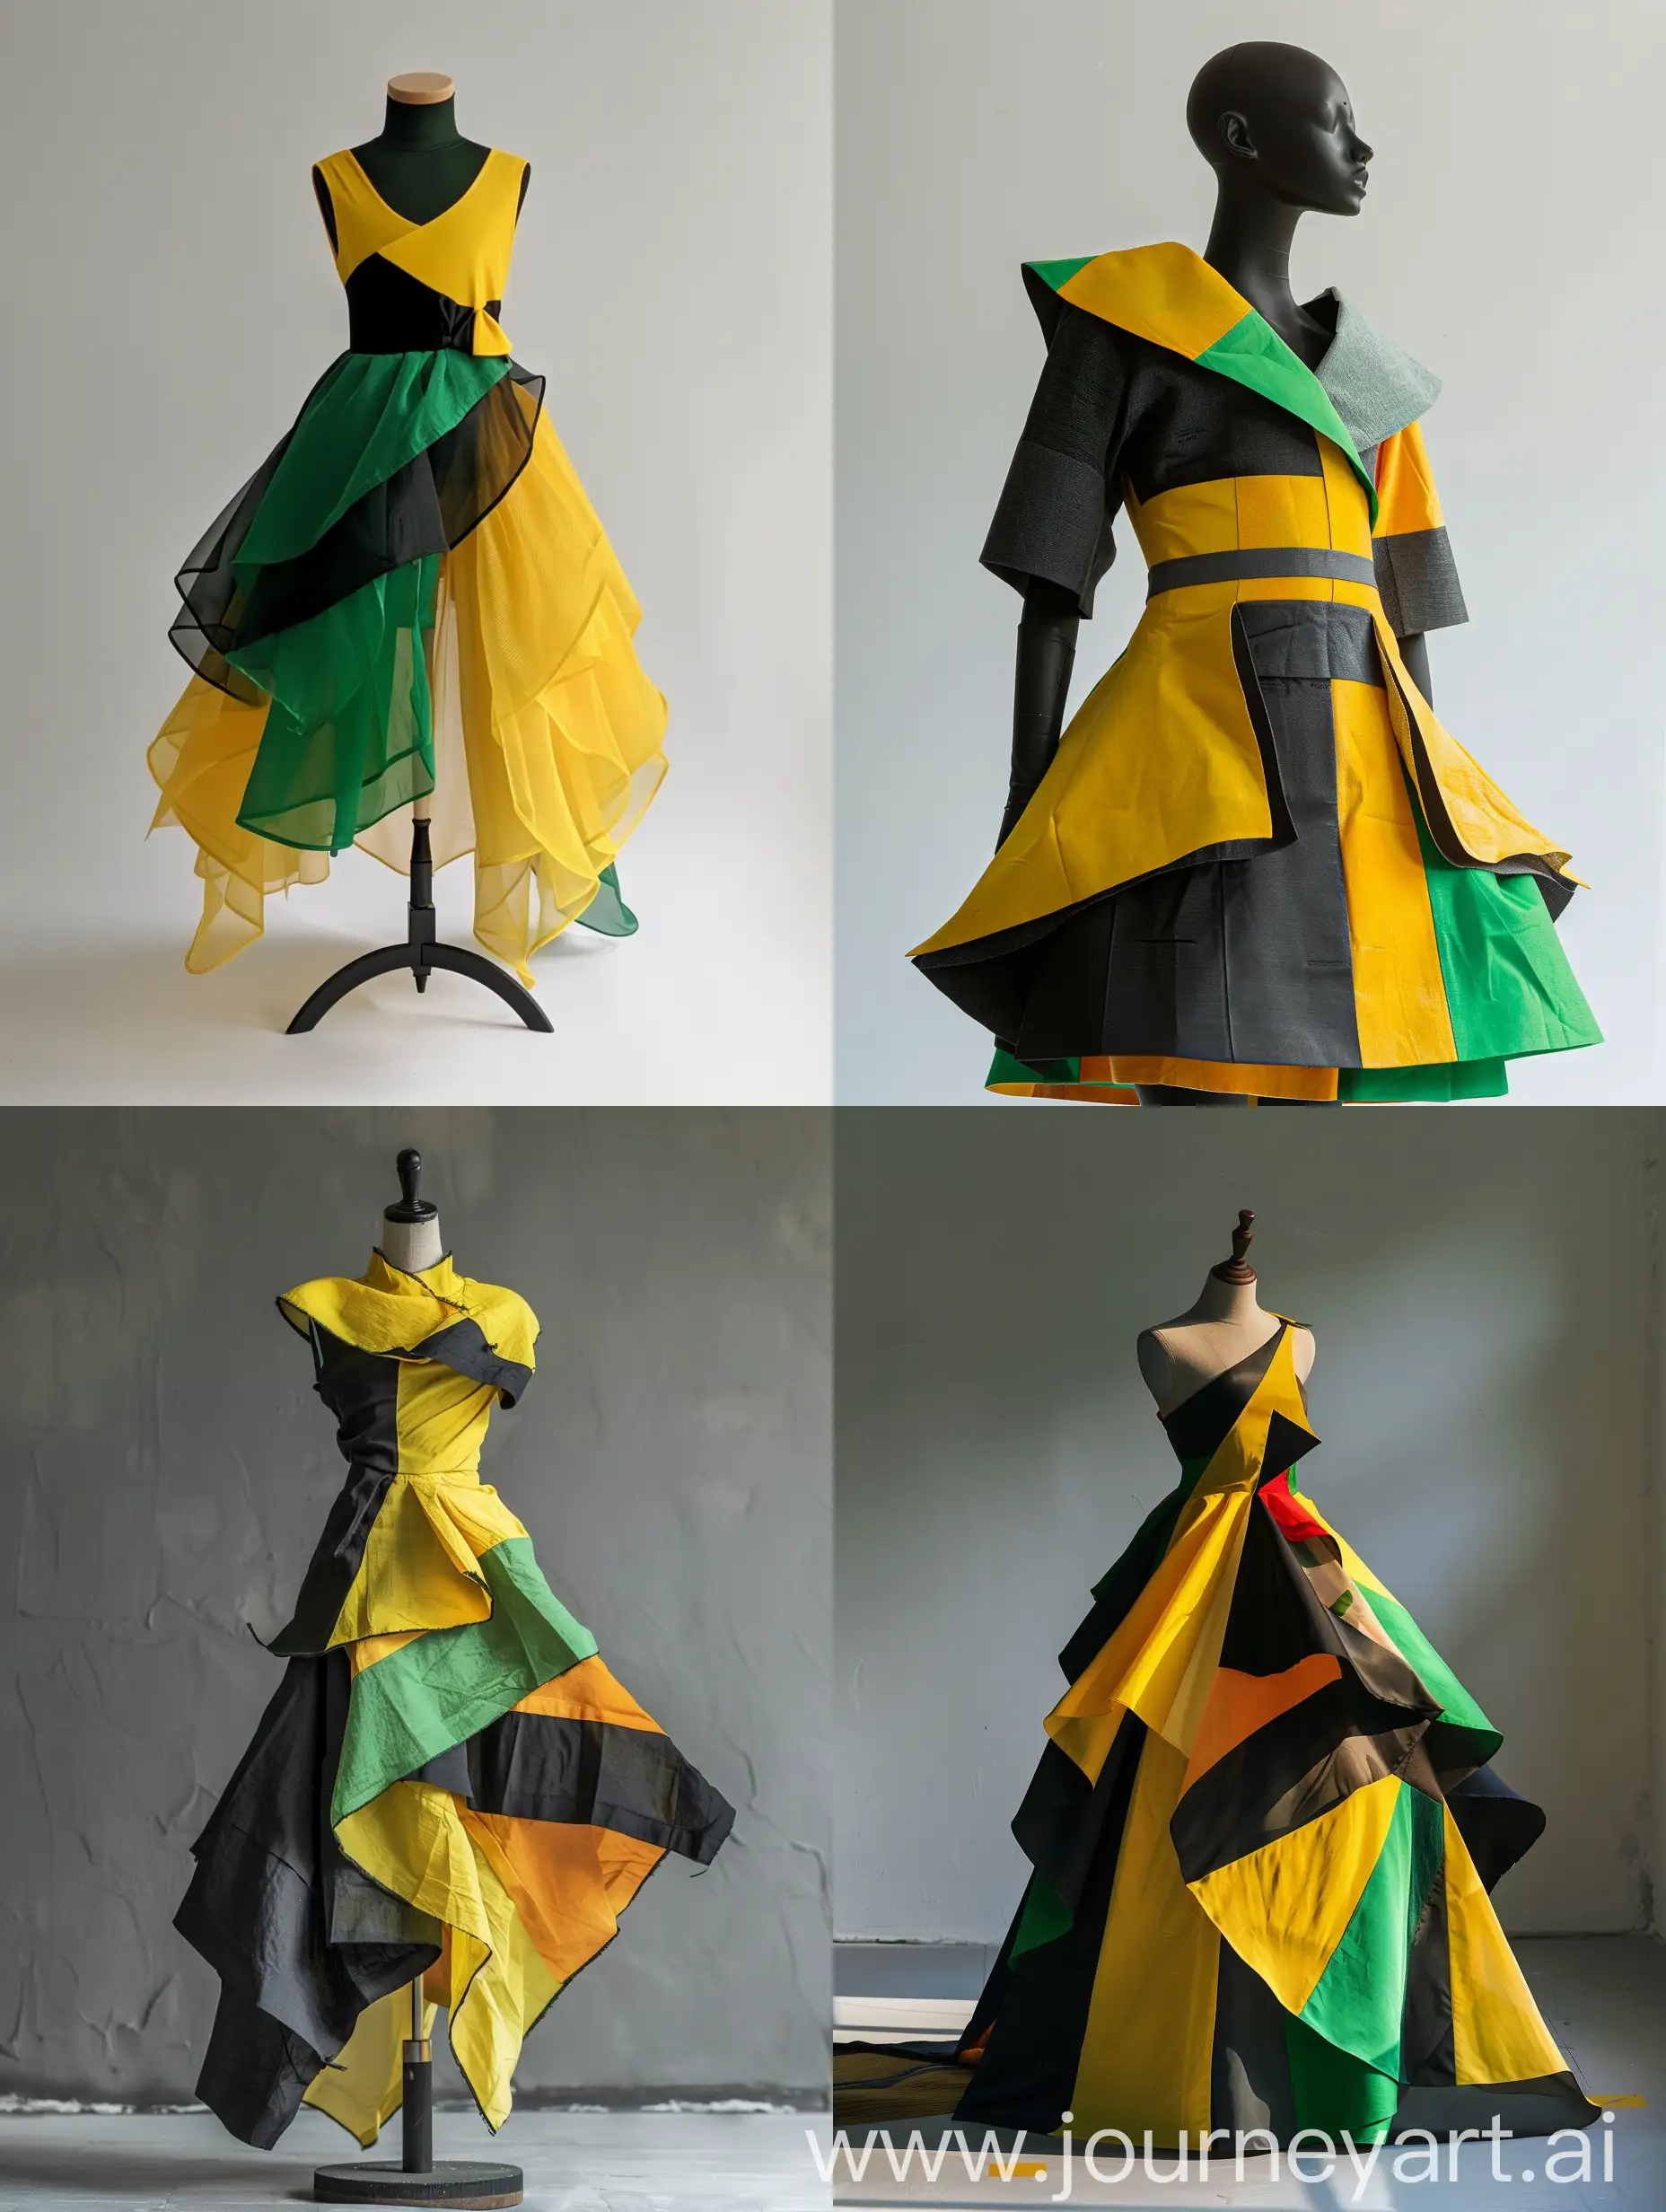 Hopeful-Future-Creative-Fashion-Design-in-Yellow-Black-and-Green-for-an-Abused-Child